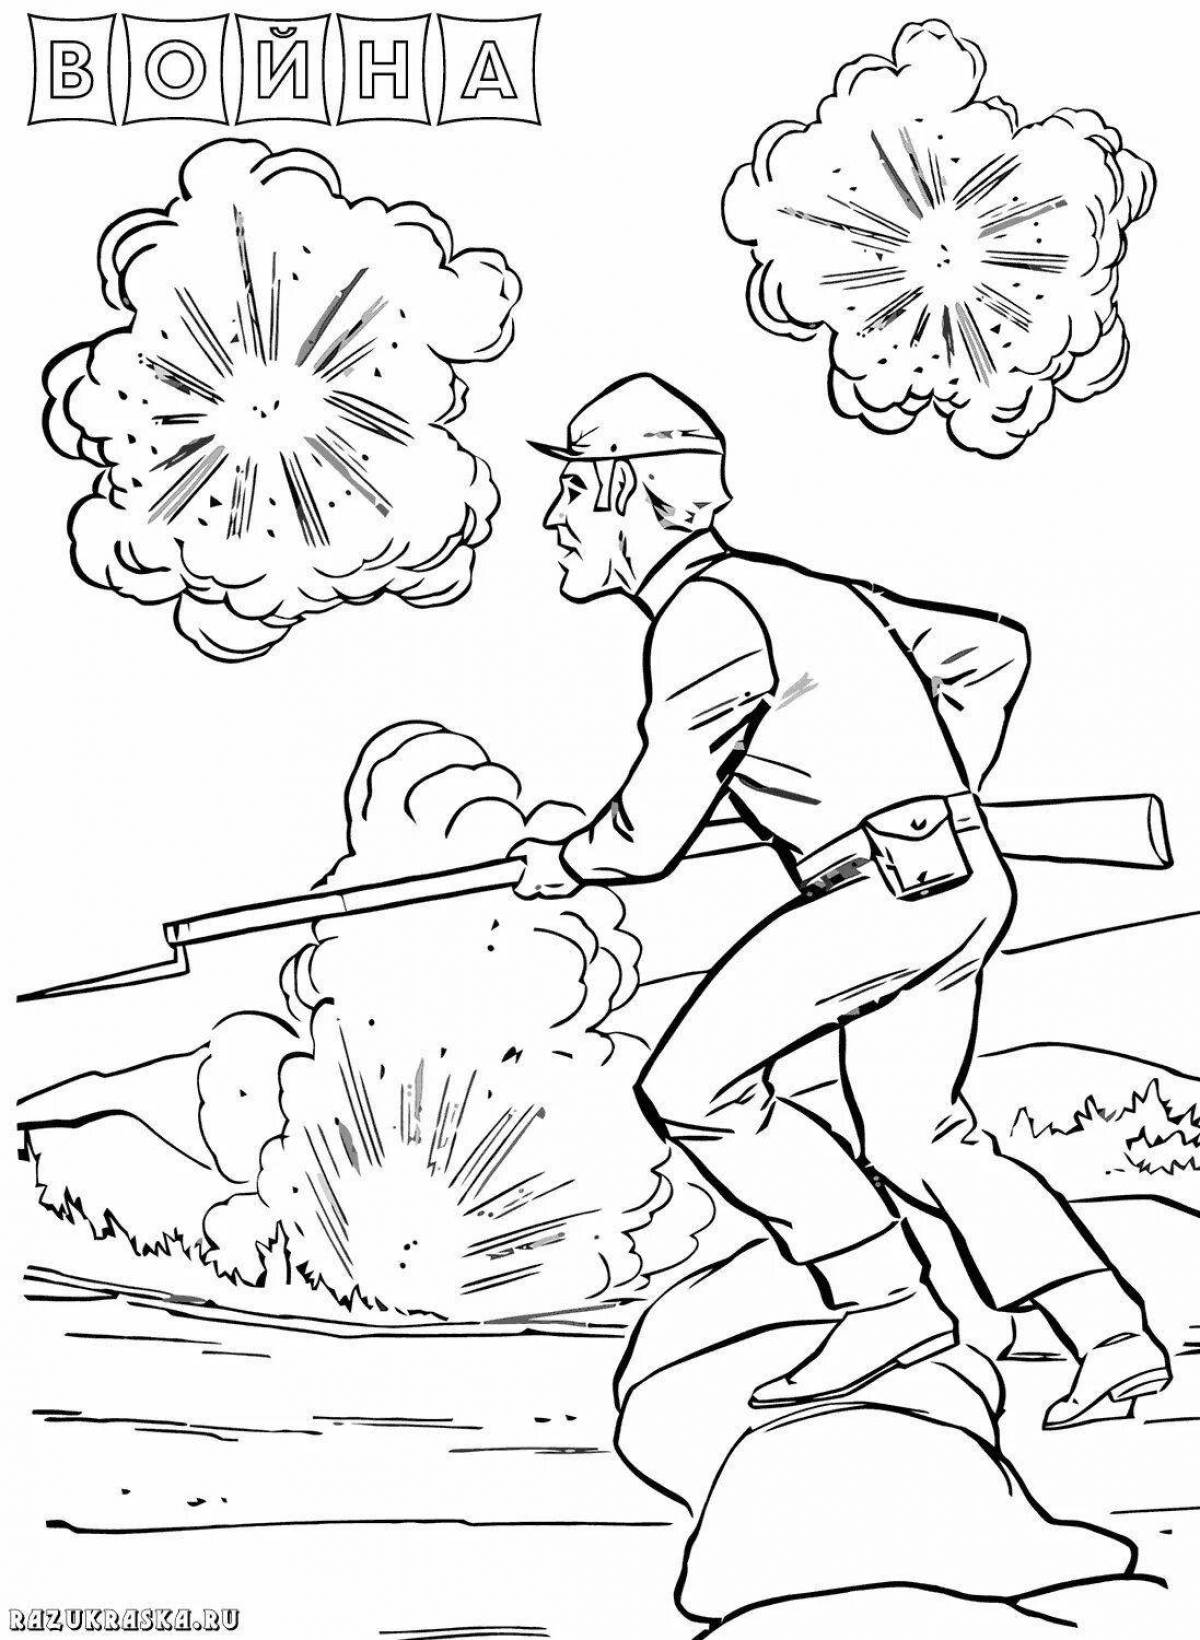 Colorful world war 2 coloring page